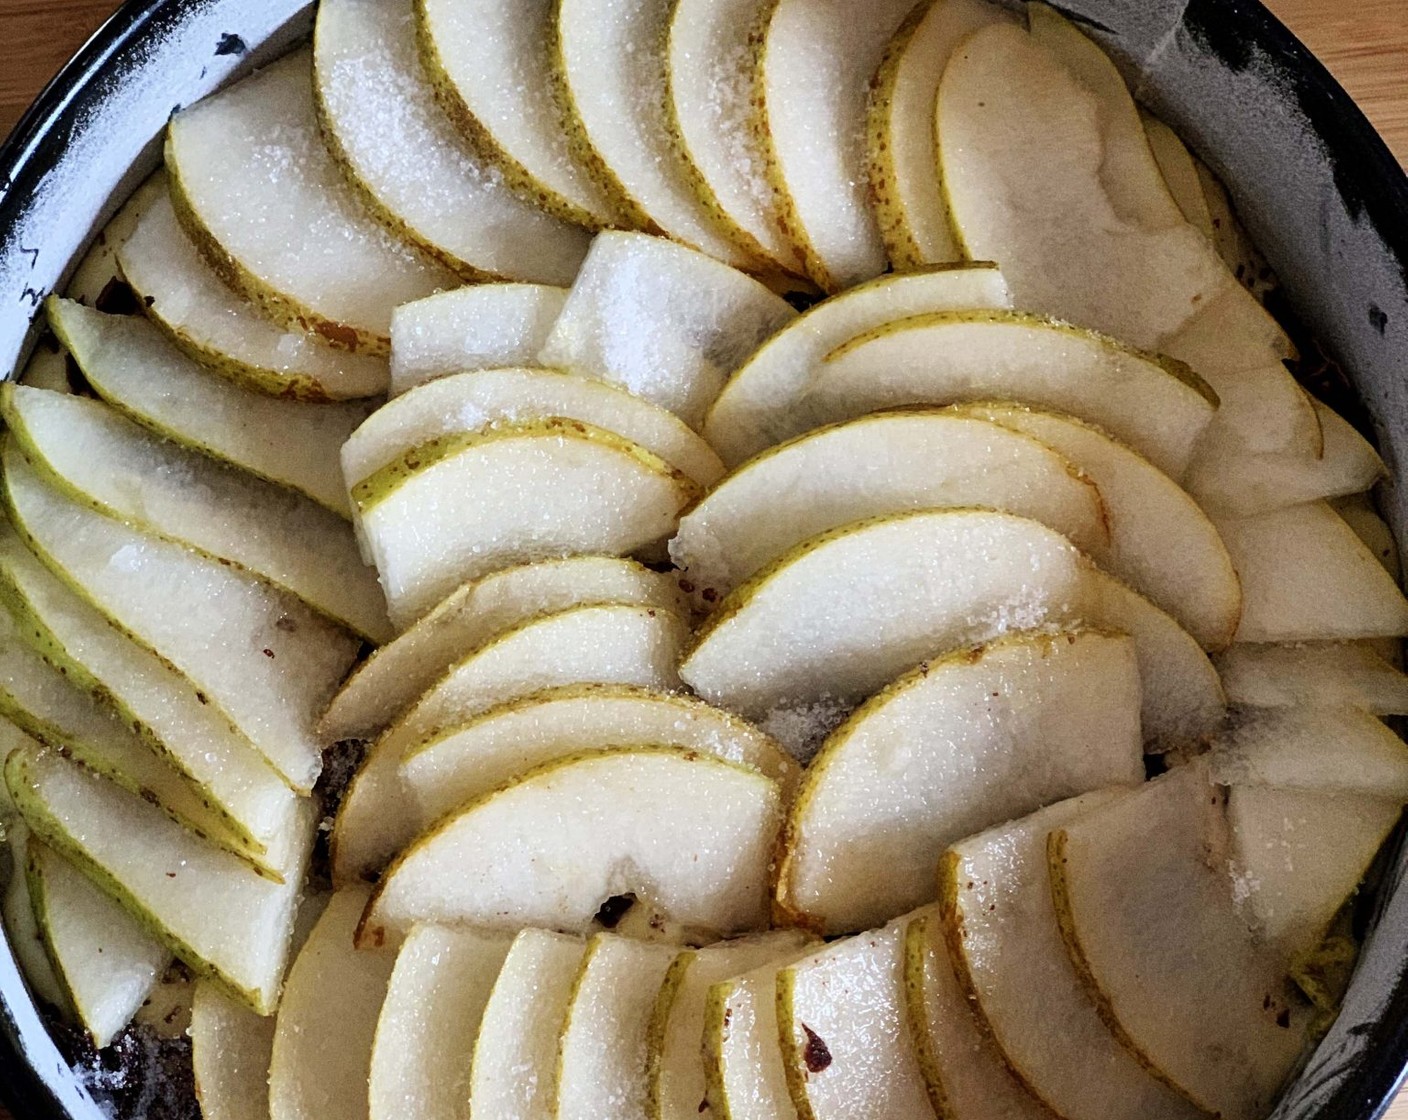 step 6 Pour the batter in an 8-inch pan lined with parchment paper. Cover the top with Dark Chocolate (3 1/2 Tbsp) and with the second sliced pear. Sprinkle some Erythritol sugar on top.